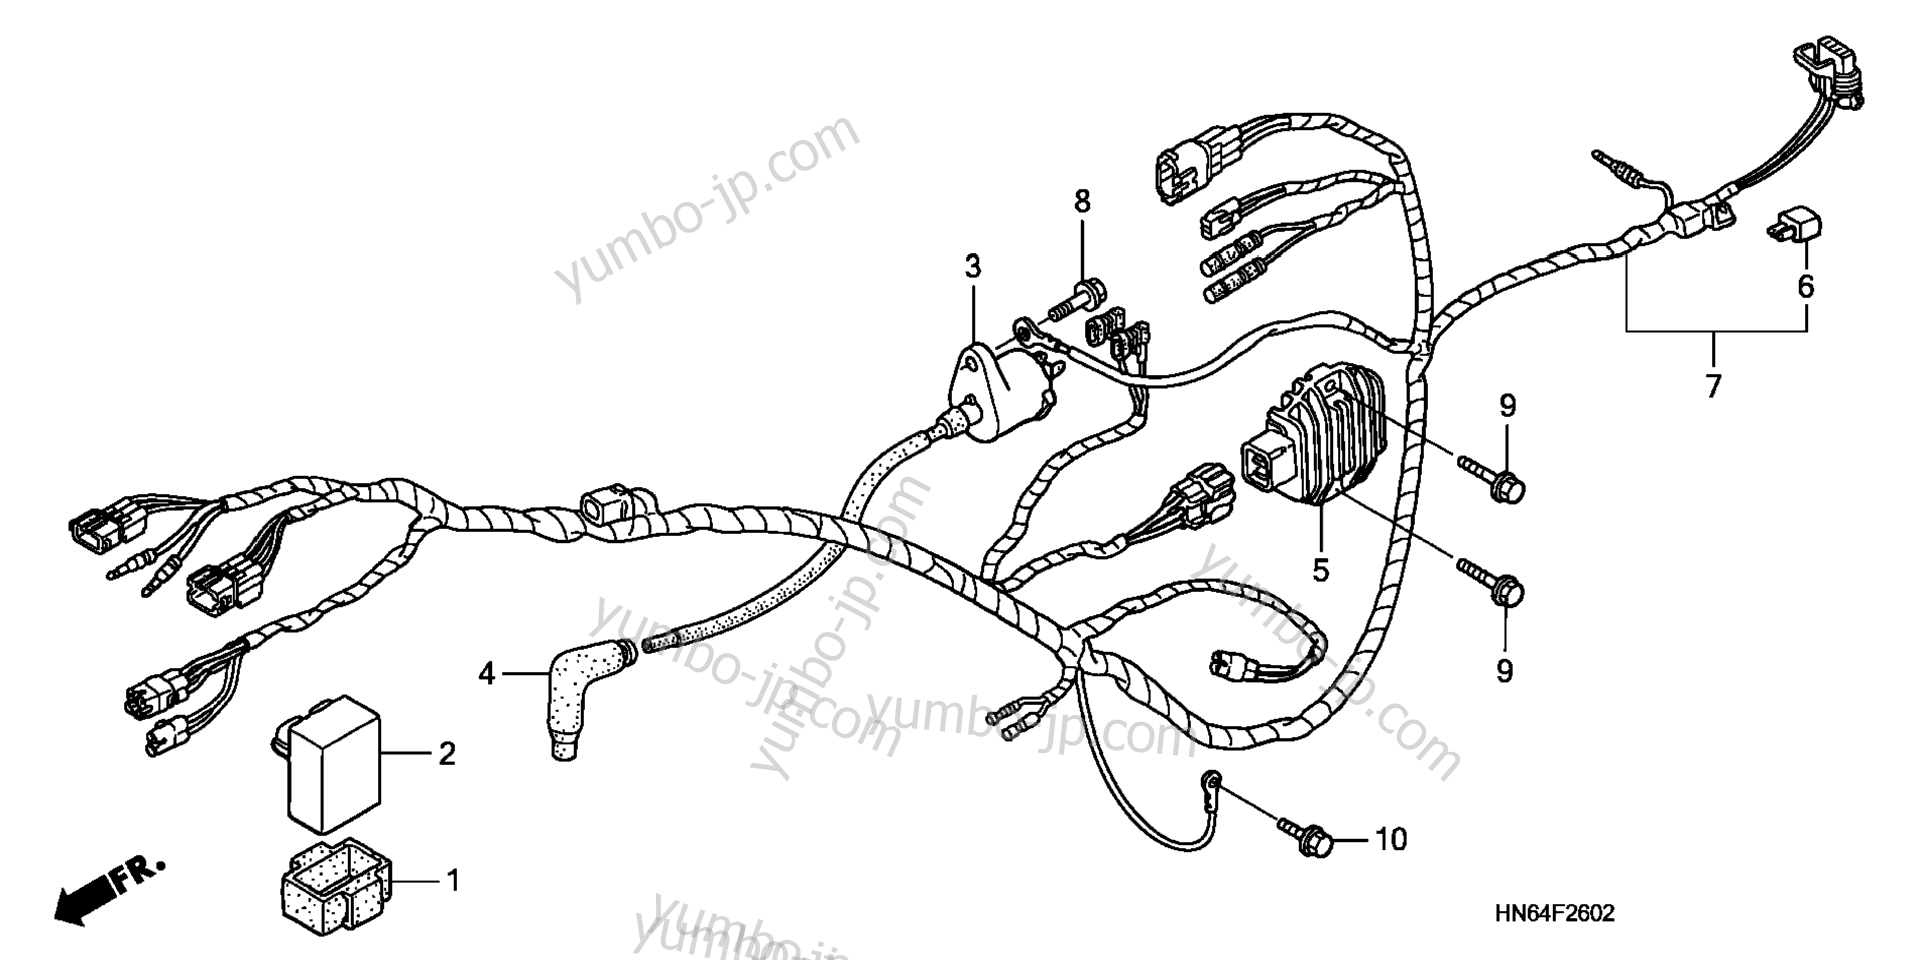 WIRE HARNESS ('08) for ATVs HONDA TRX250EX A 2008 year